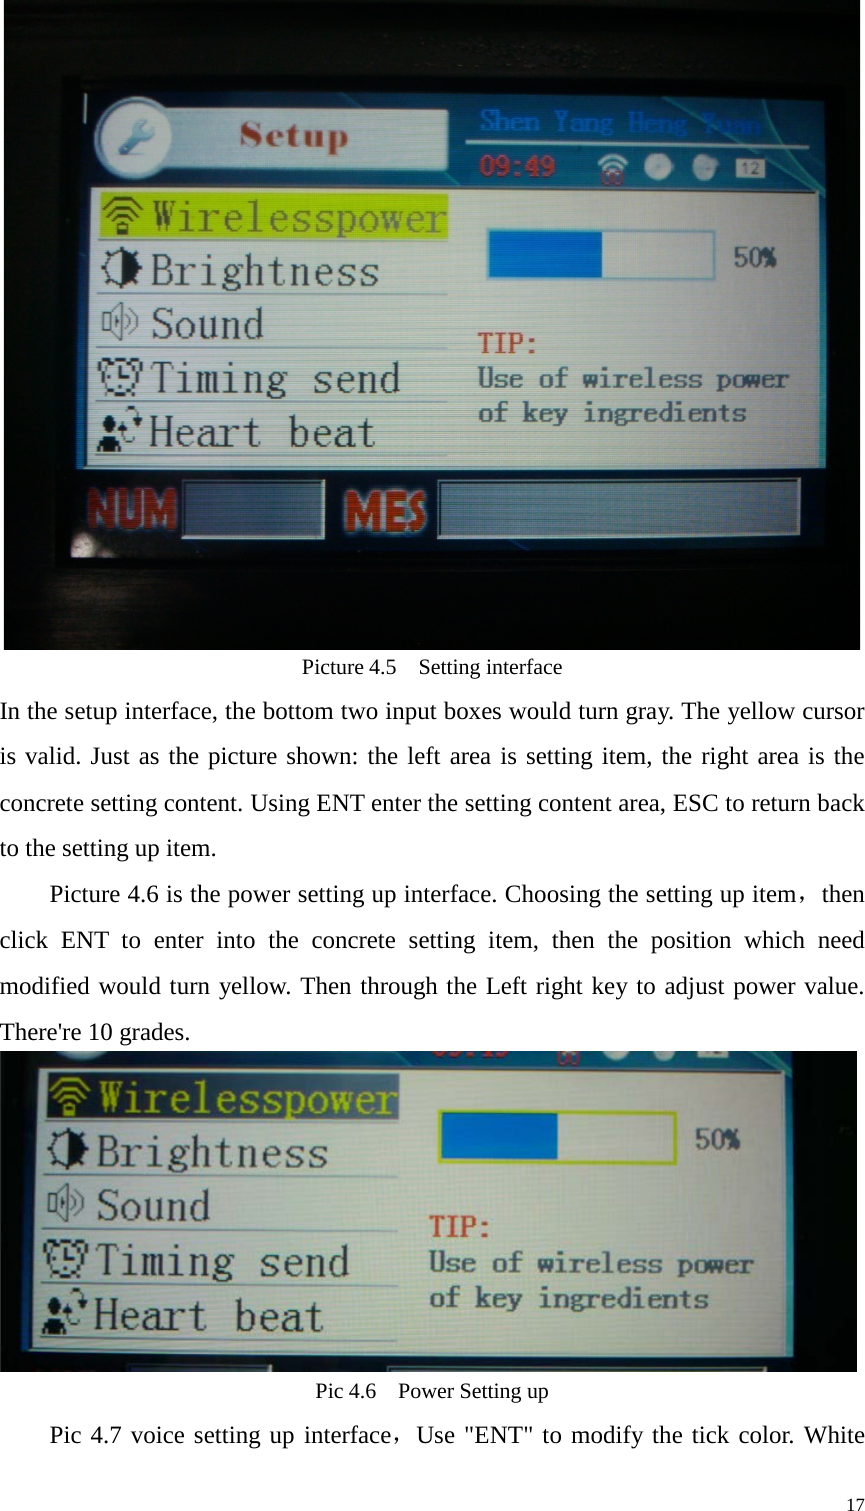    Picture 4.5  Setting interface In the setup interface, the bottom two input boxes would turn gray. The yellow cursor is valid. Just as the picture shown: the left area is setting item, the right area is the concrete setting content. Using ENT enter the setting content area, ESC to return back to the setting up item.   Picture 4.6 is the power setting up interface. Choosing the setting up item，then click ENT to enter into the concrete setting item, then the position which need modified would turn yellow. Then through the Left right key to adjust power value. There&apos;re 10 grades.      Pic 4.6  Power Setting up   Pic 4.7 voice setting up interface，Use &quot;ENT&quot; to modify the tick color. White     17 